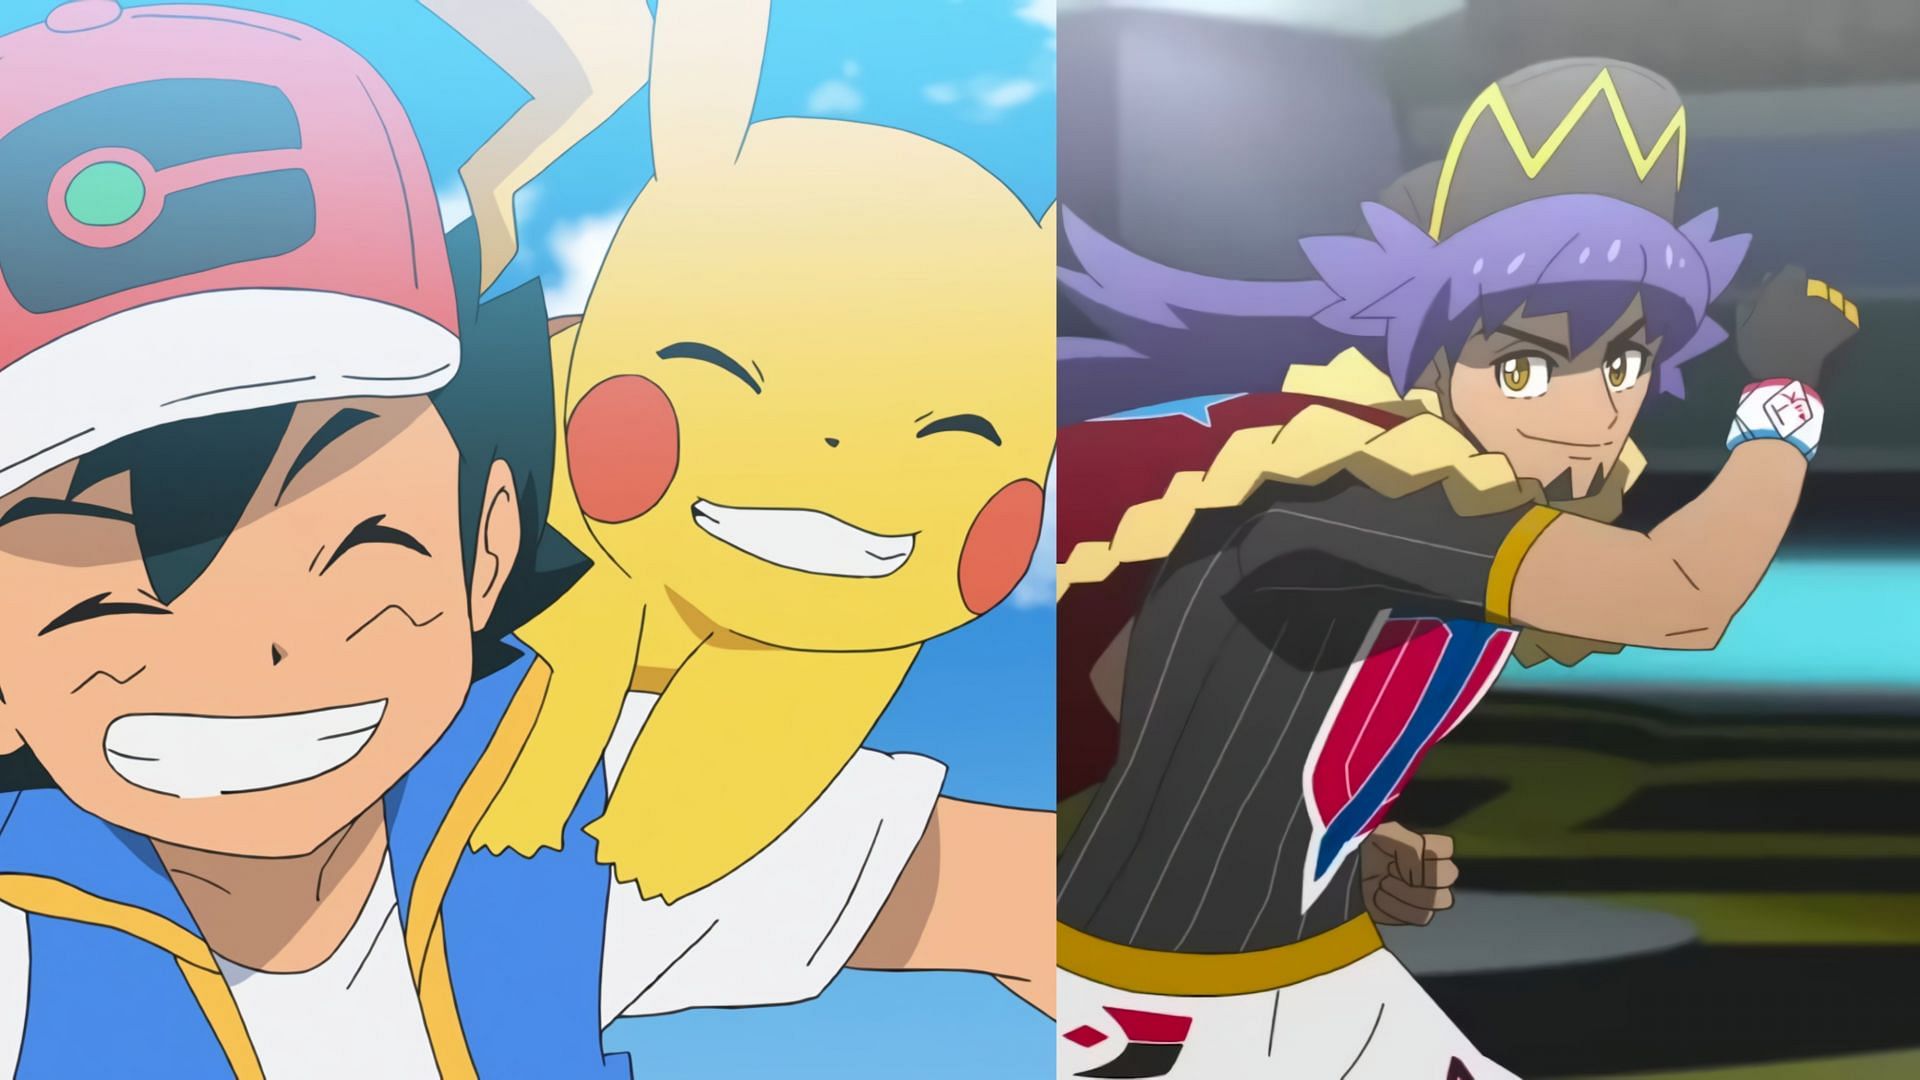 Can Ash and Pikachu beat Leon in Pokemon Journeys episode 131 (Image via OLM Incorporated)